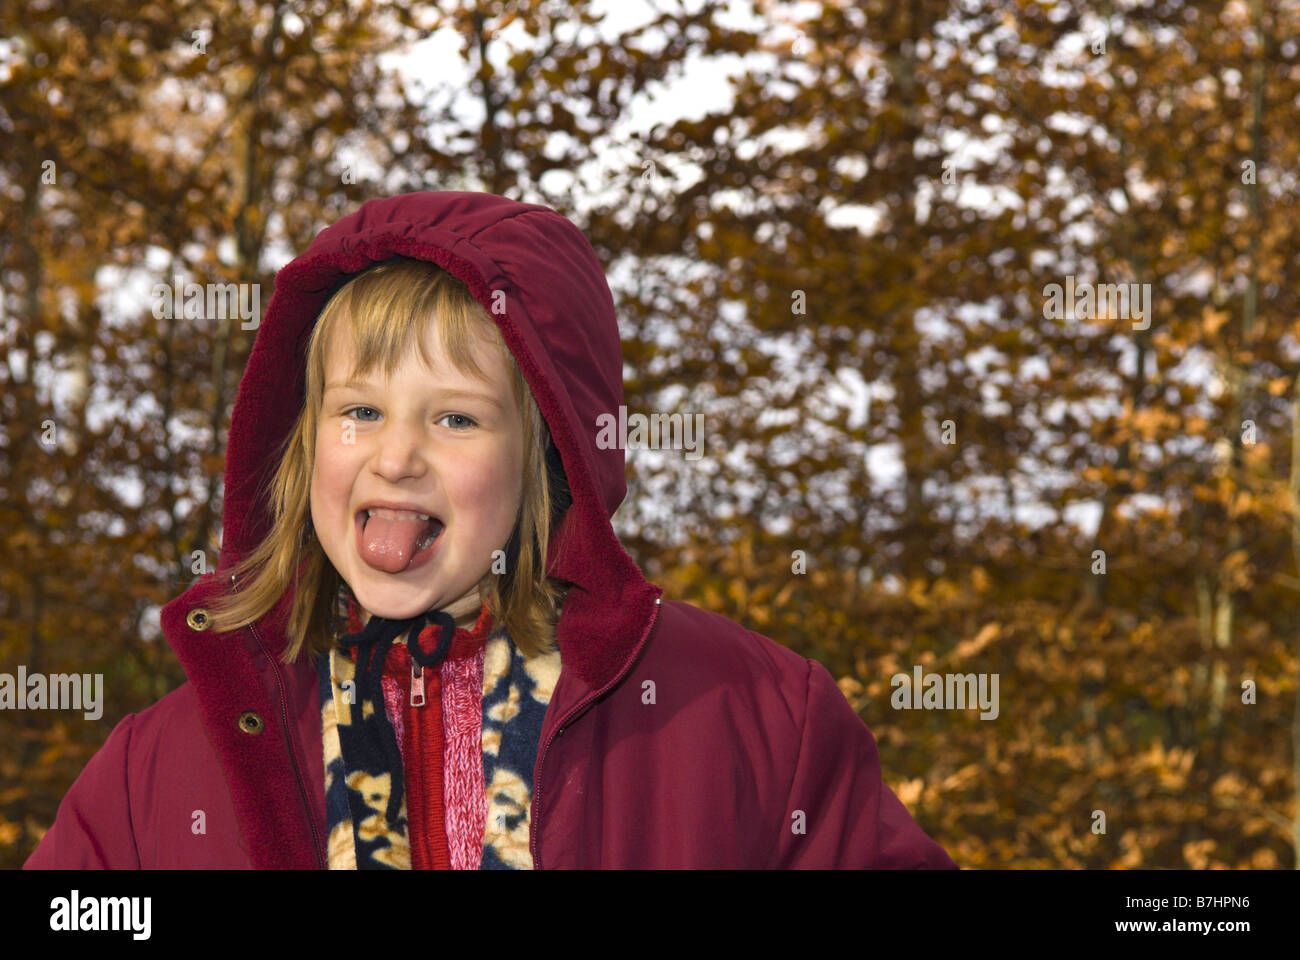 small blond girl with jacket and cap in an autumn forest, foolish around, poking her tongue out, France, Lorraine Stock Photo